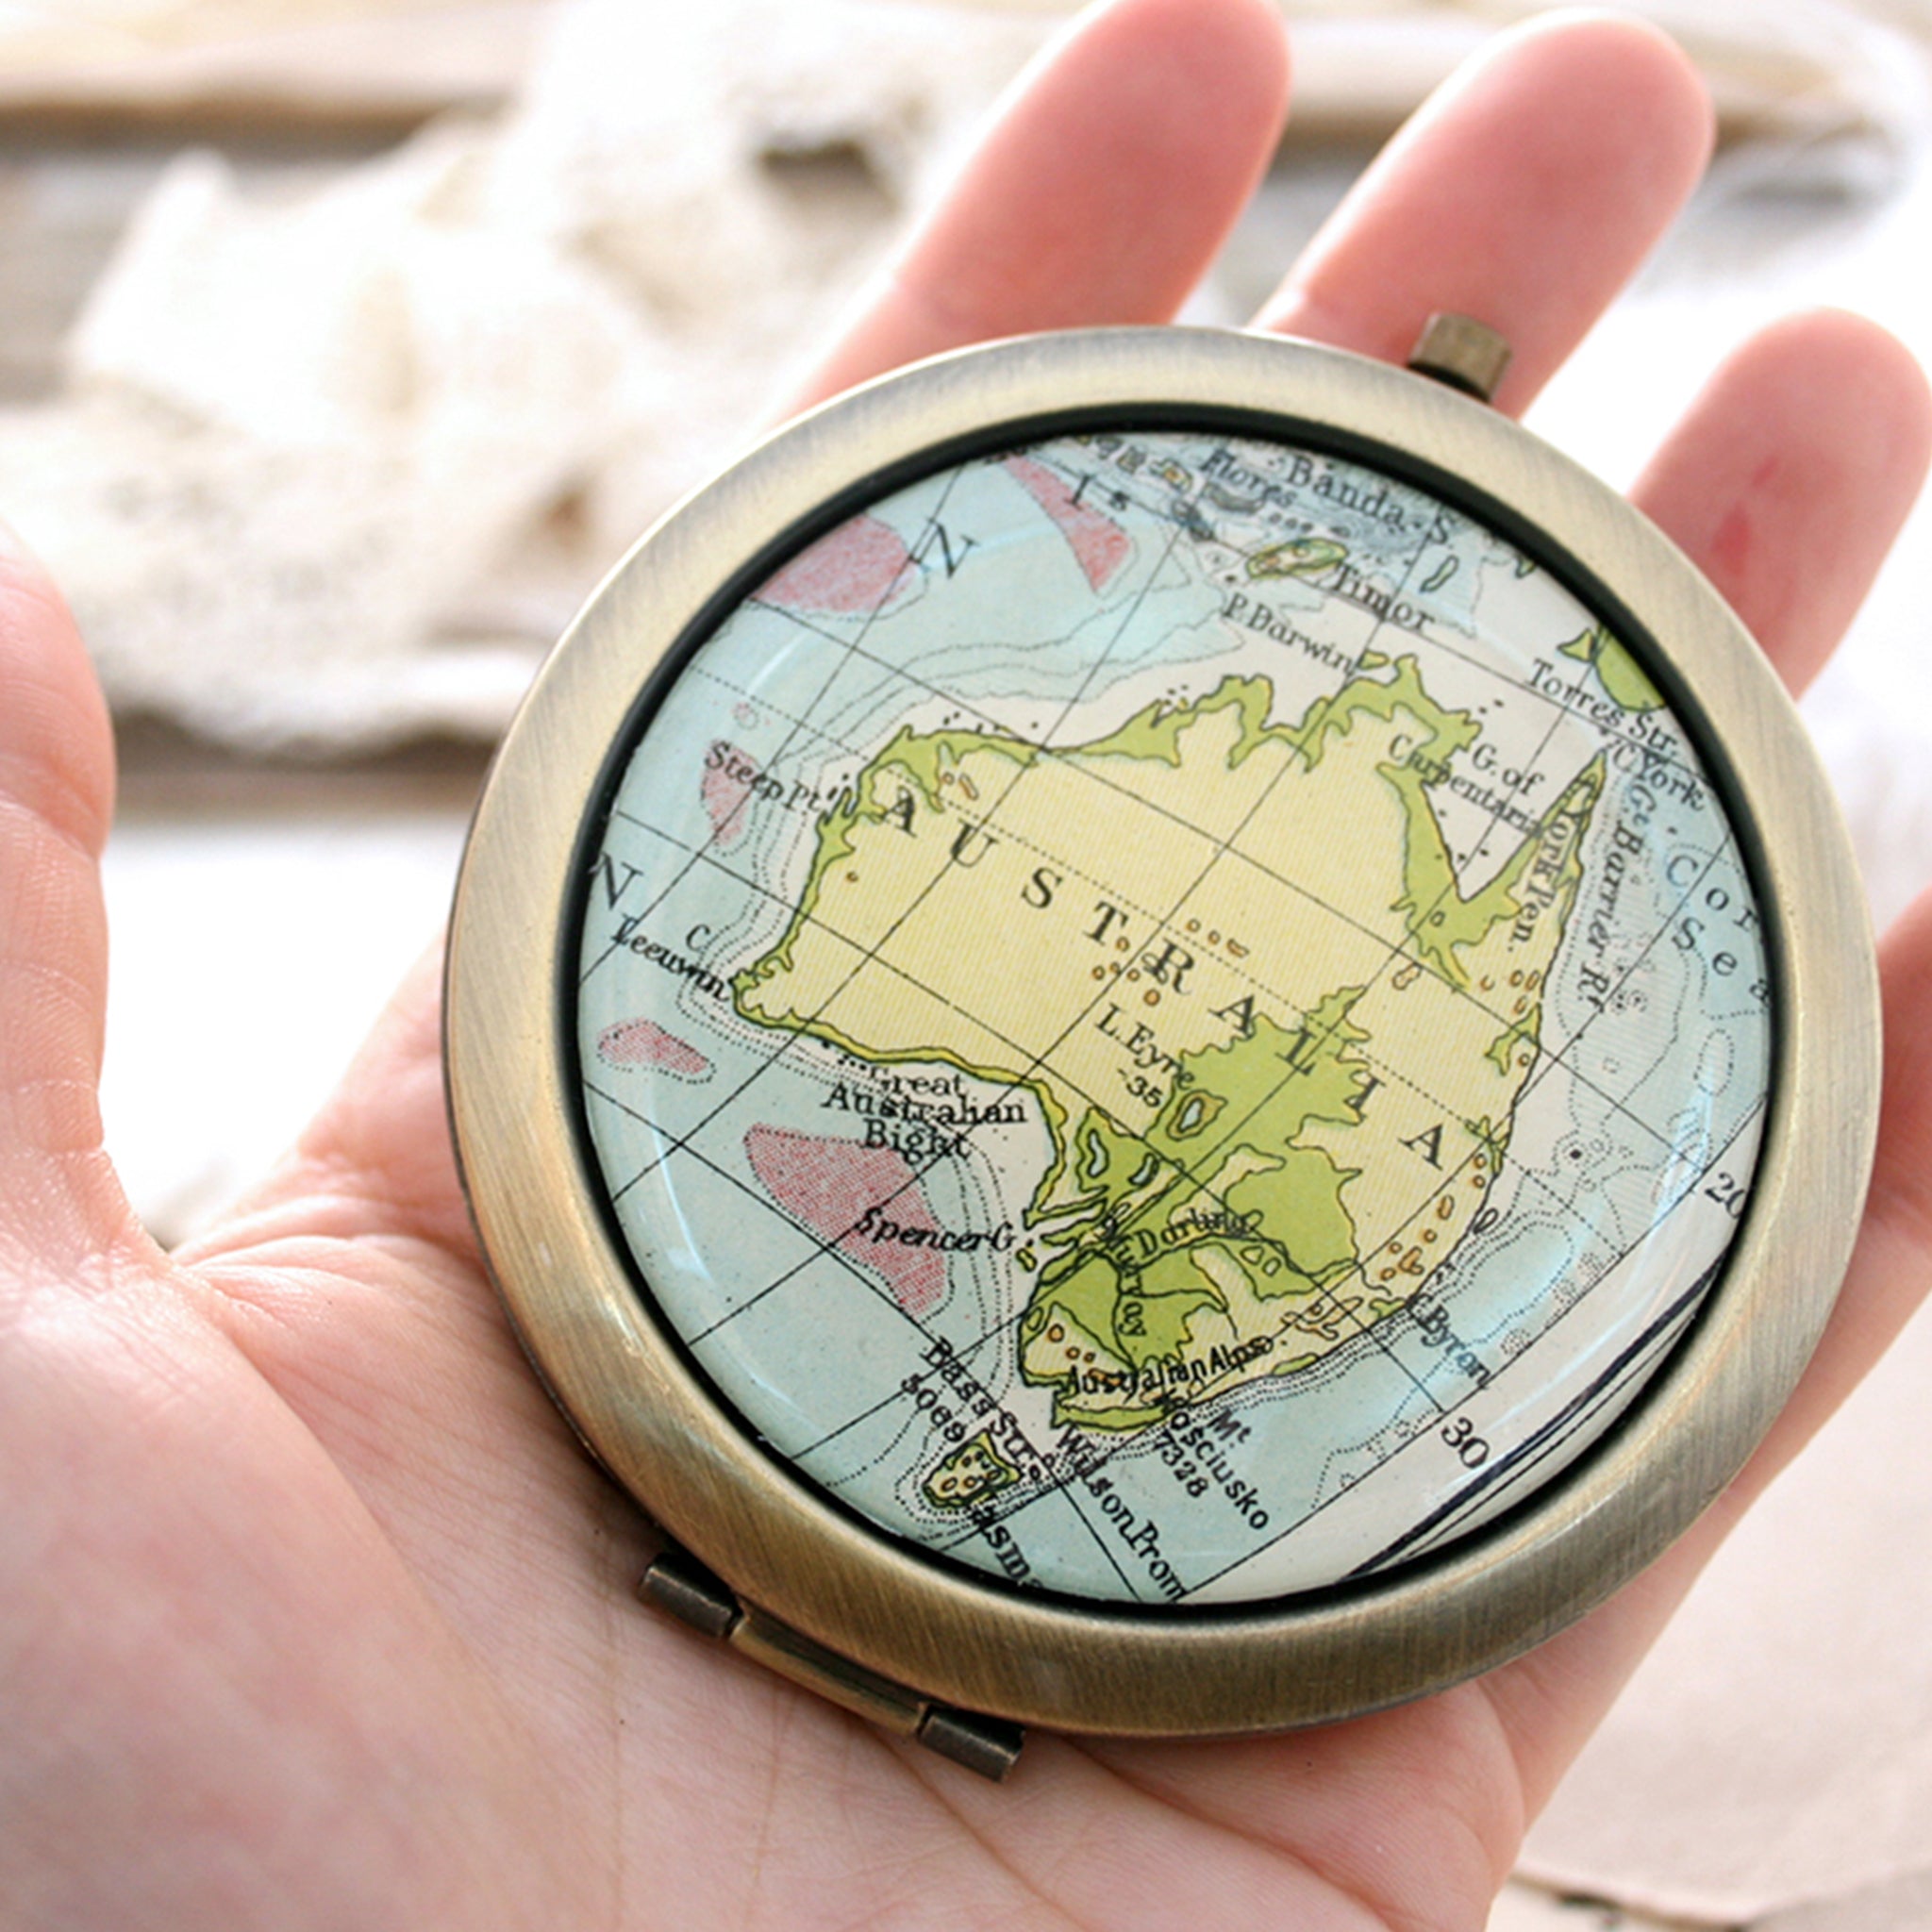 Hold in hand Personalised Compact Mirror in Antique Bronze color featuring map of Australia